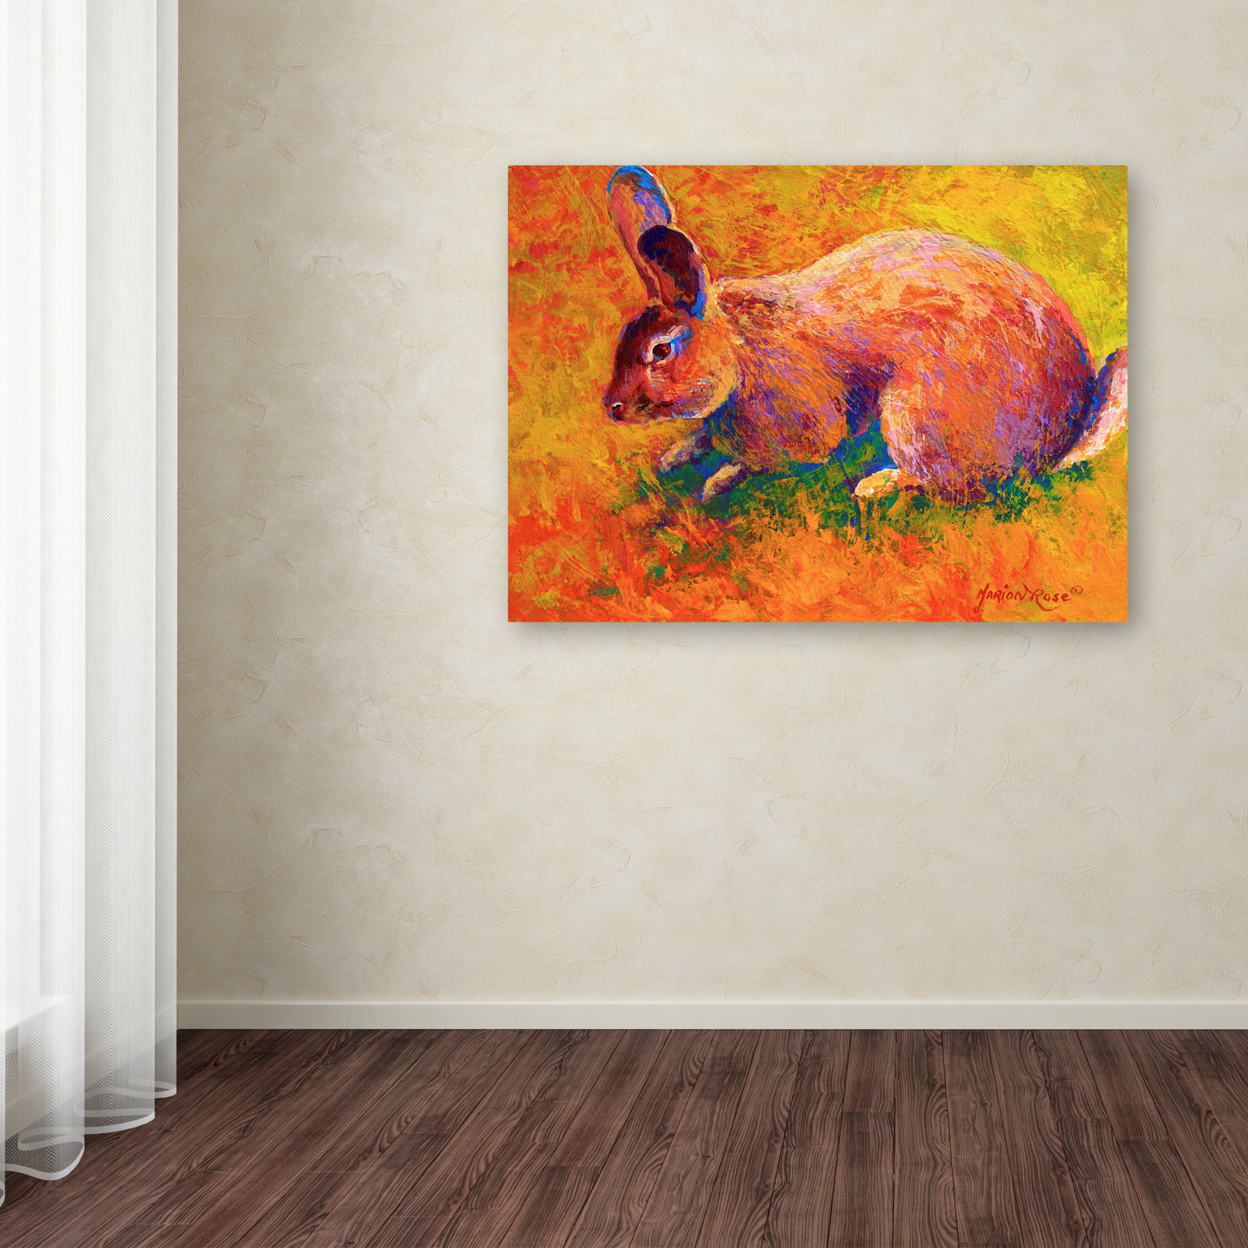 Marion Rose 'Rabbit 1' Ready To Hang Canvas Art 14 X 19 Inches Made In USA